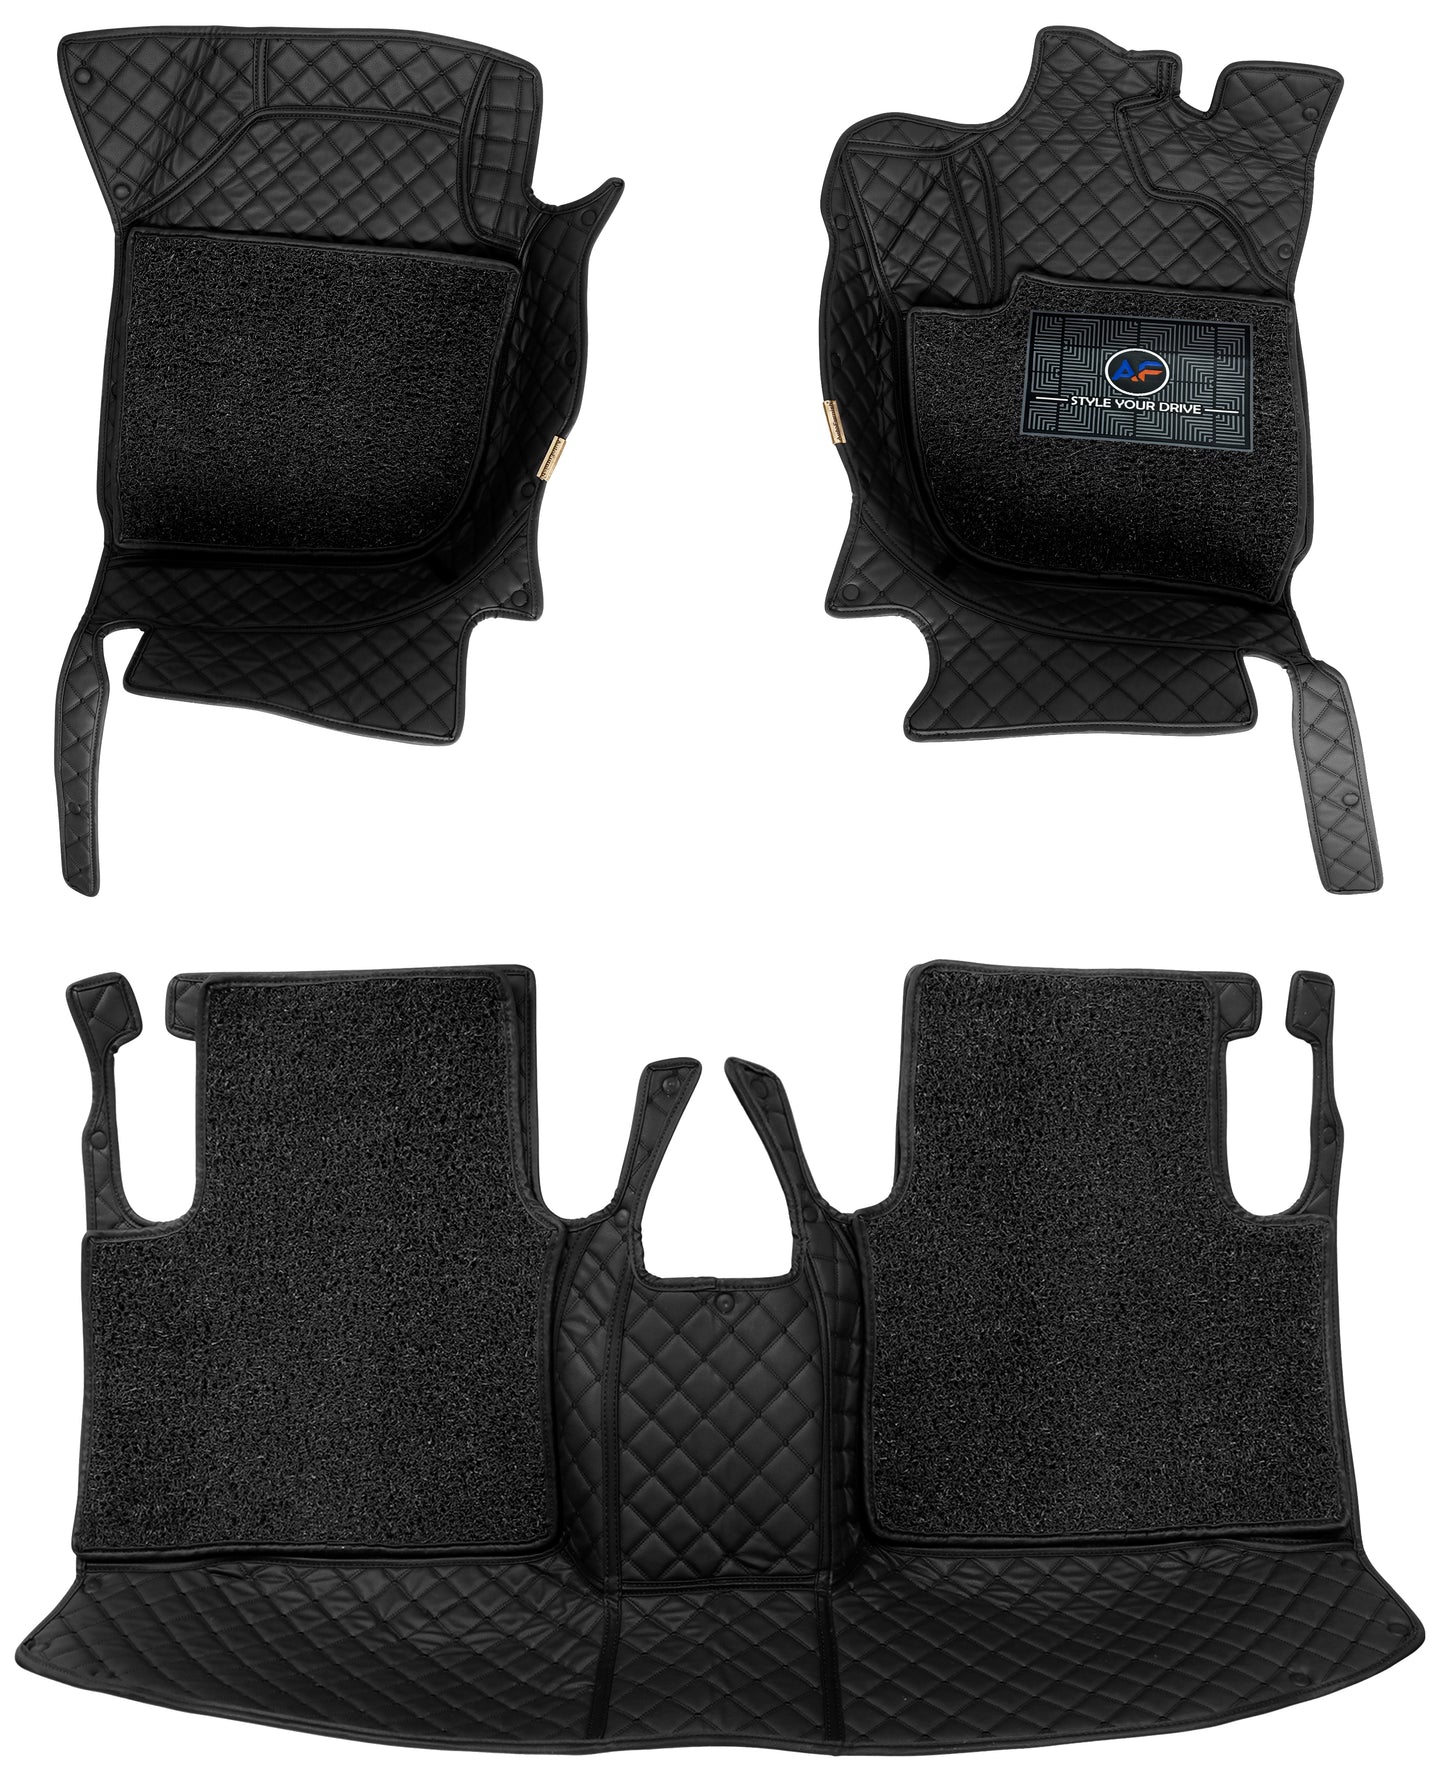 Mahindra XUV500 2015-20-7D Luxury Car Mat, All Weather Proof, Anti-Skid, 100% Waterproof & Odorless with Unique Diamond Fish Design (24mm Luxury PU Leather, 2 Rows)